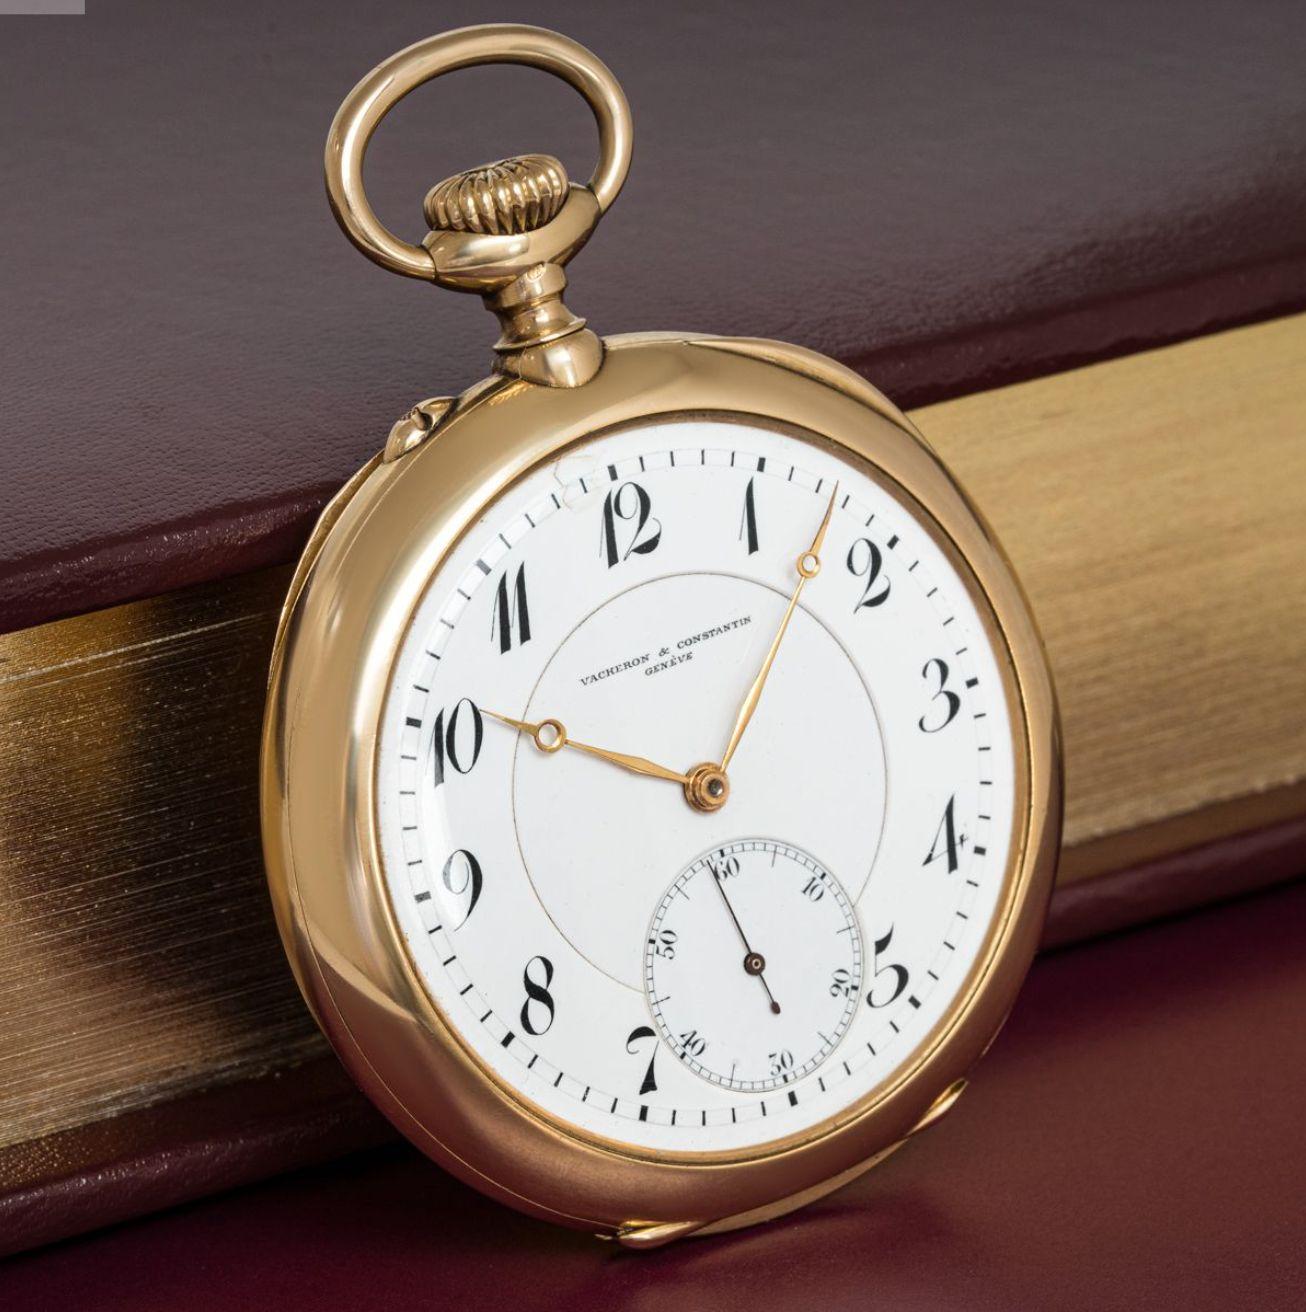 Vacheron & Constantin. A Rare 18ct Gold Keyless Lever Open Face Pocket Watch C1920s.

Dial: The perfect white enamel dial fully signed Vacheron & Constantin Genève with unusual Breguet style numerals and matching Gilt metal Breguet style moon